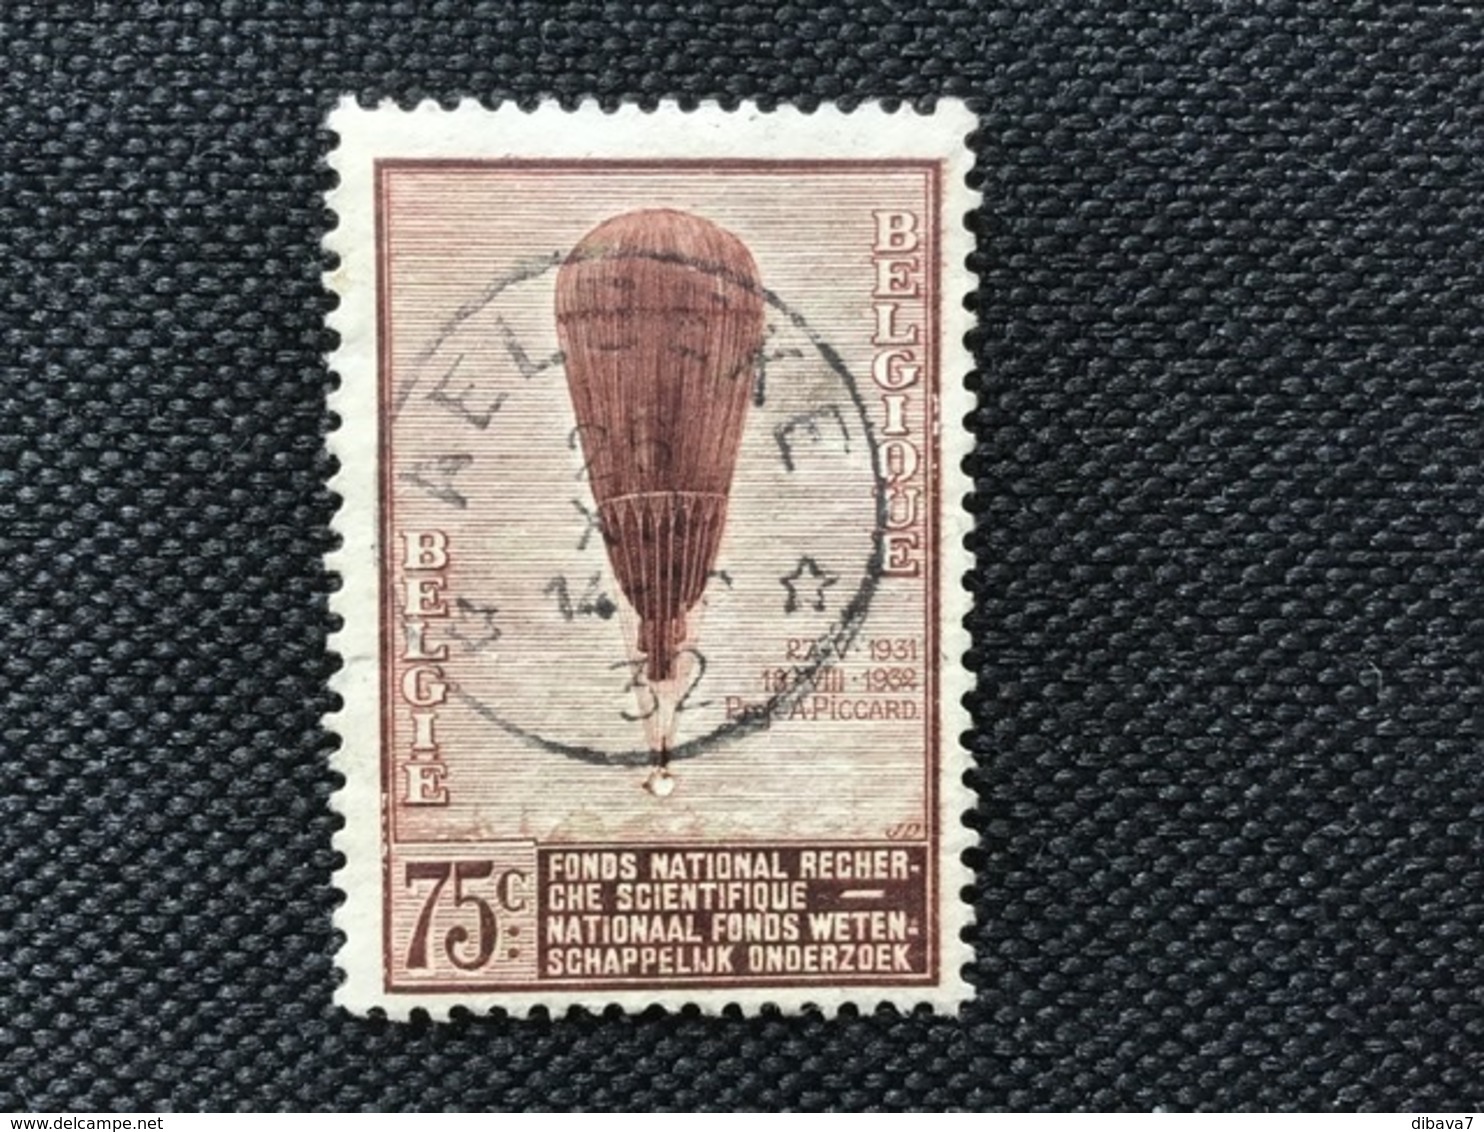 1932. OBP 353 . Used .Series ( Balloon Piccard ) Little Stamp AELBEKE 1932. - Used Stamps